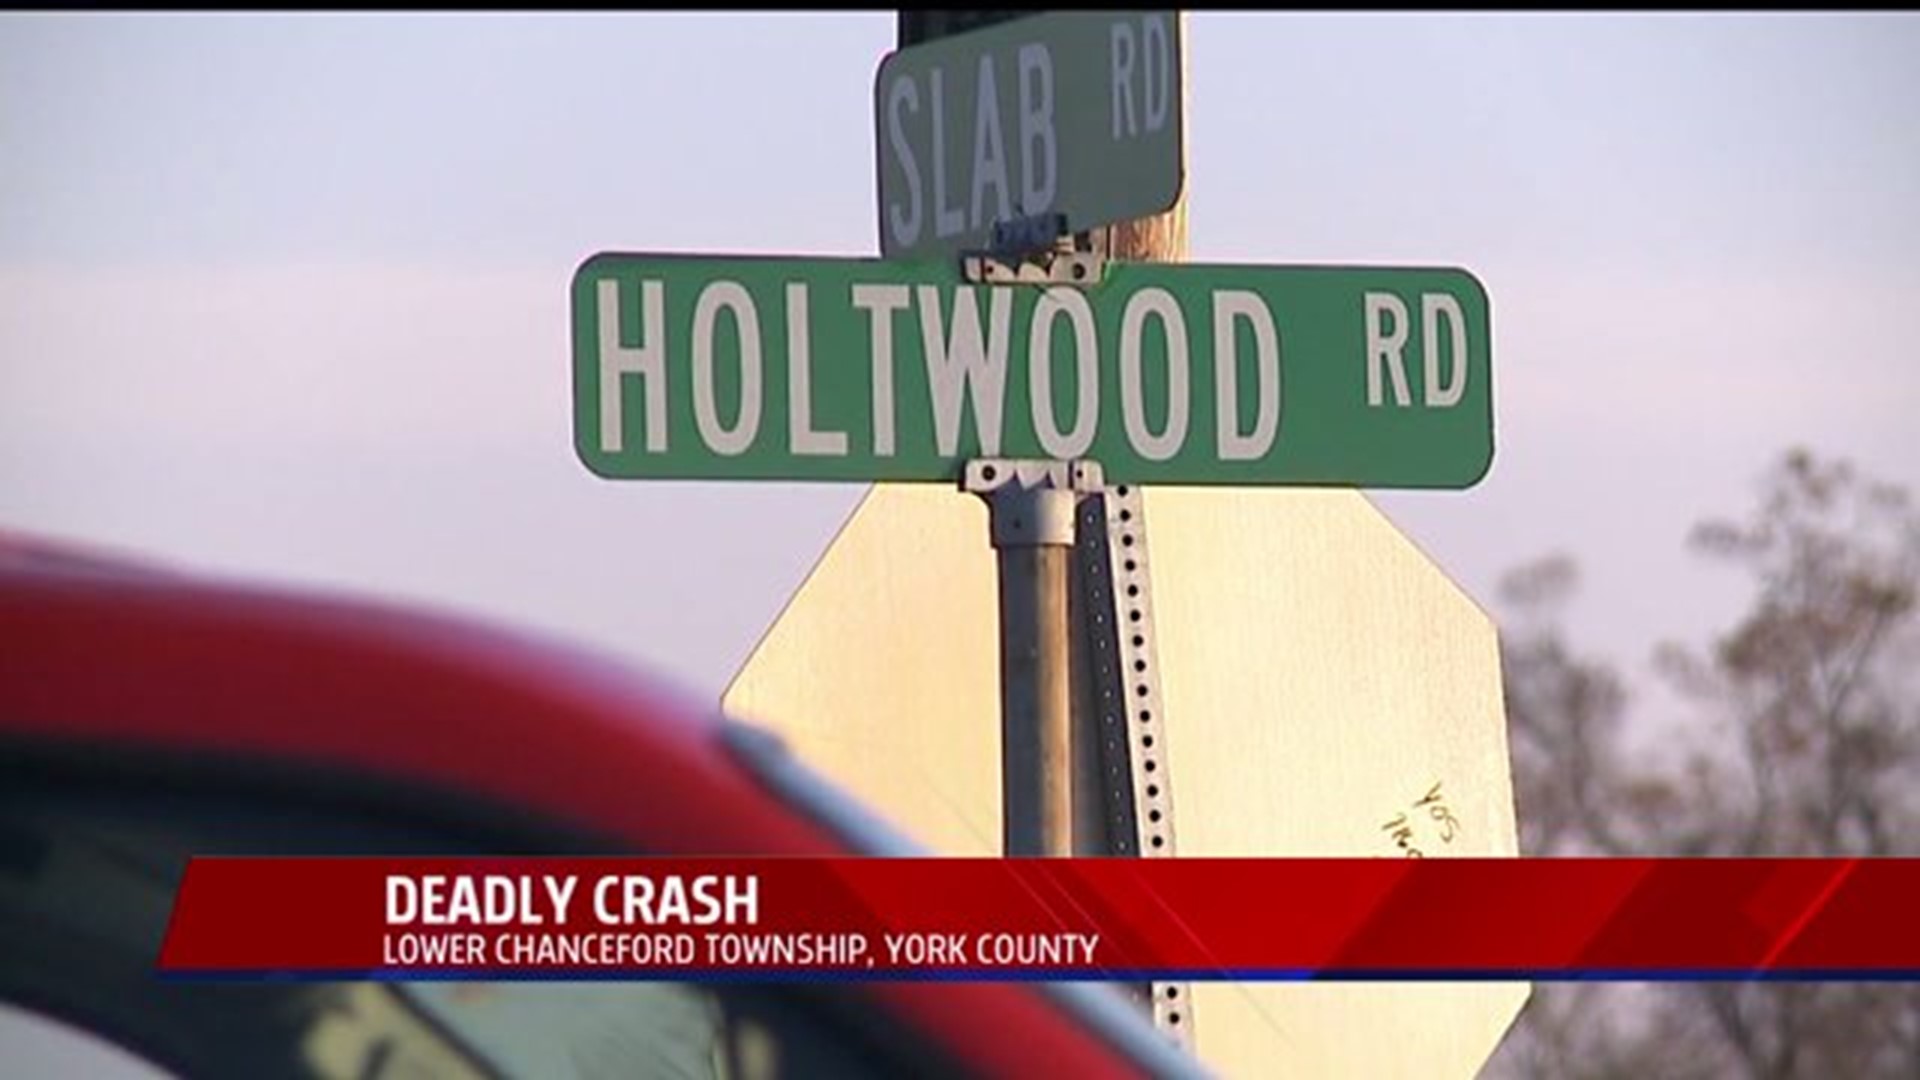 Fatal along Holtwood Road in York County